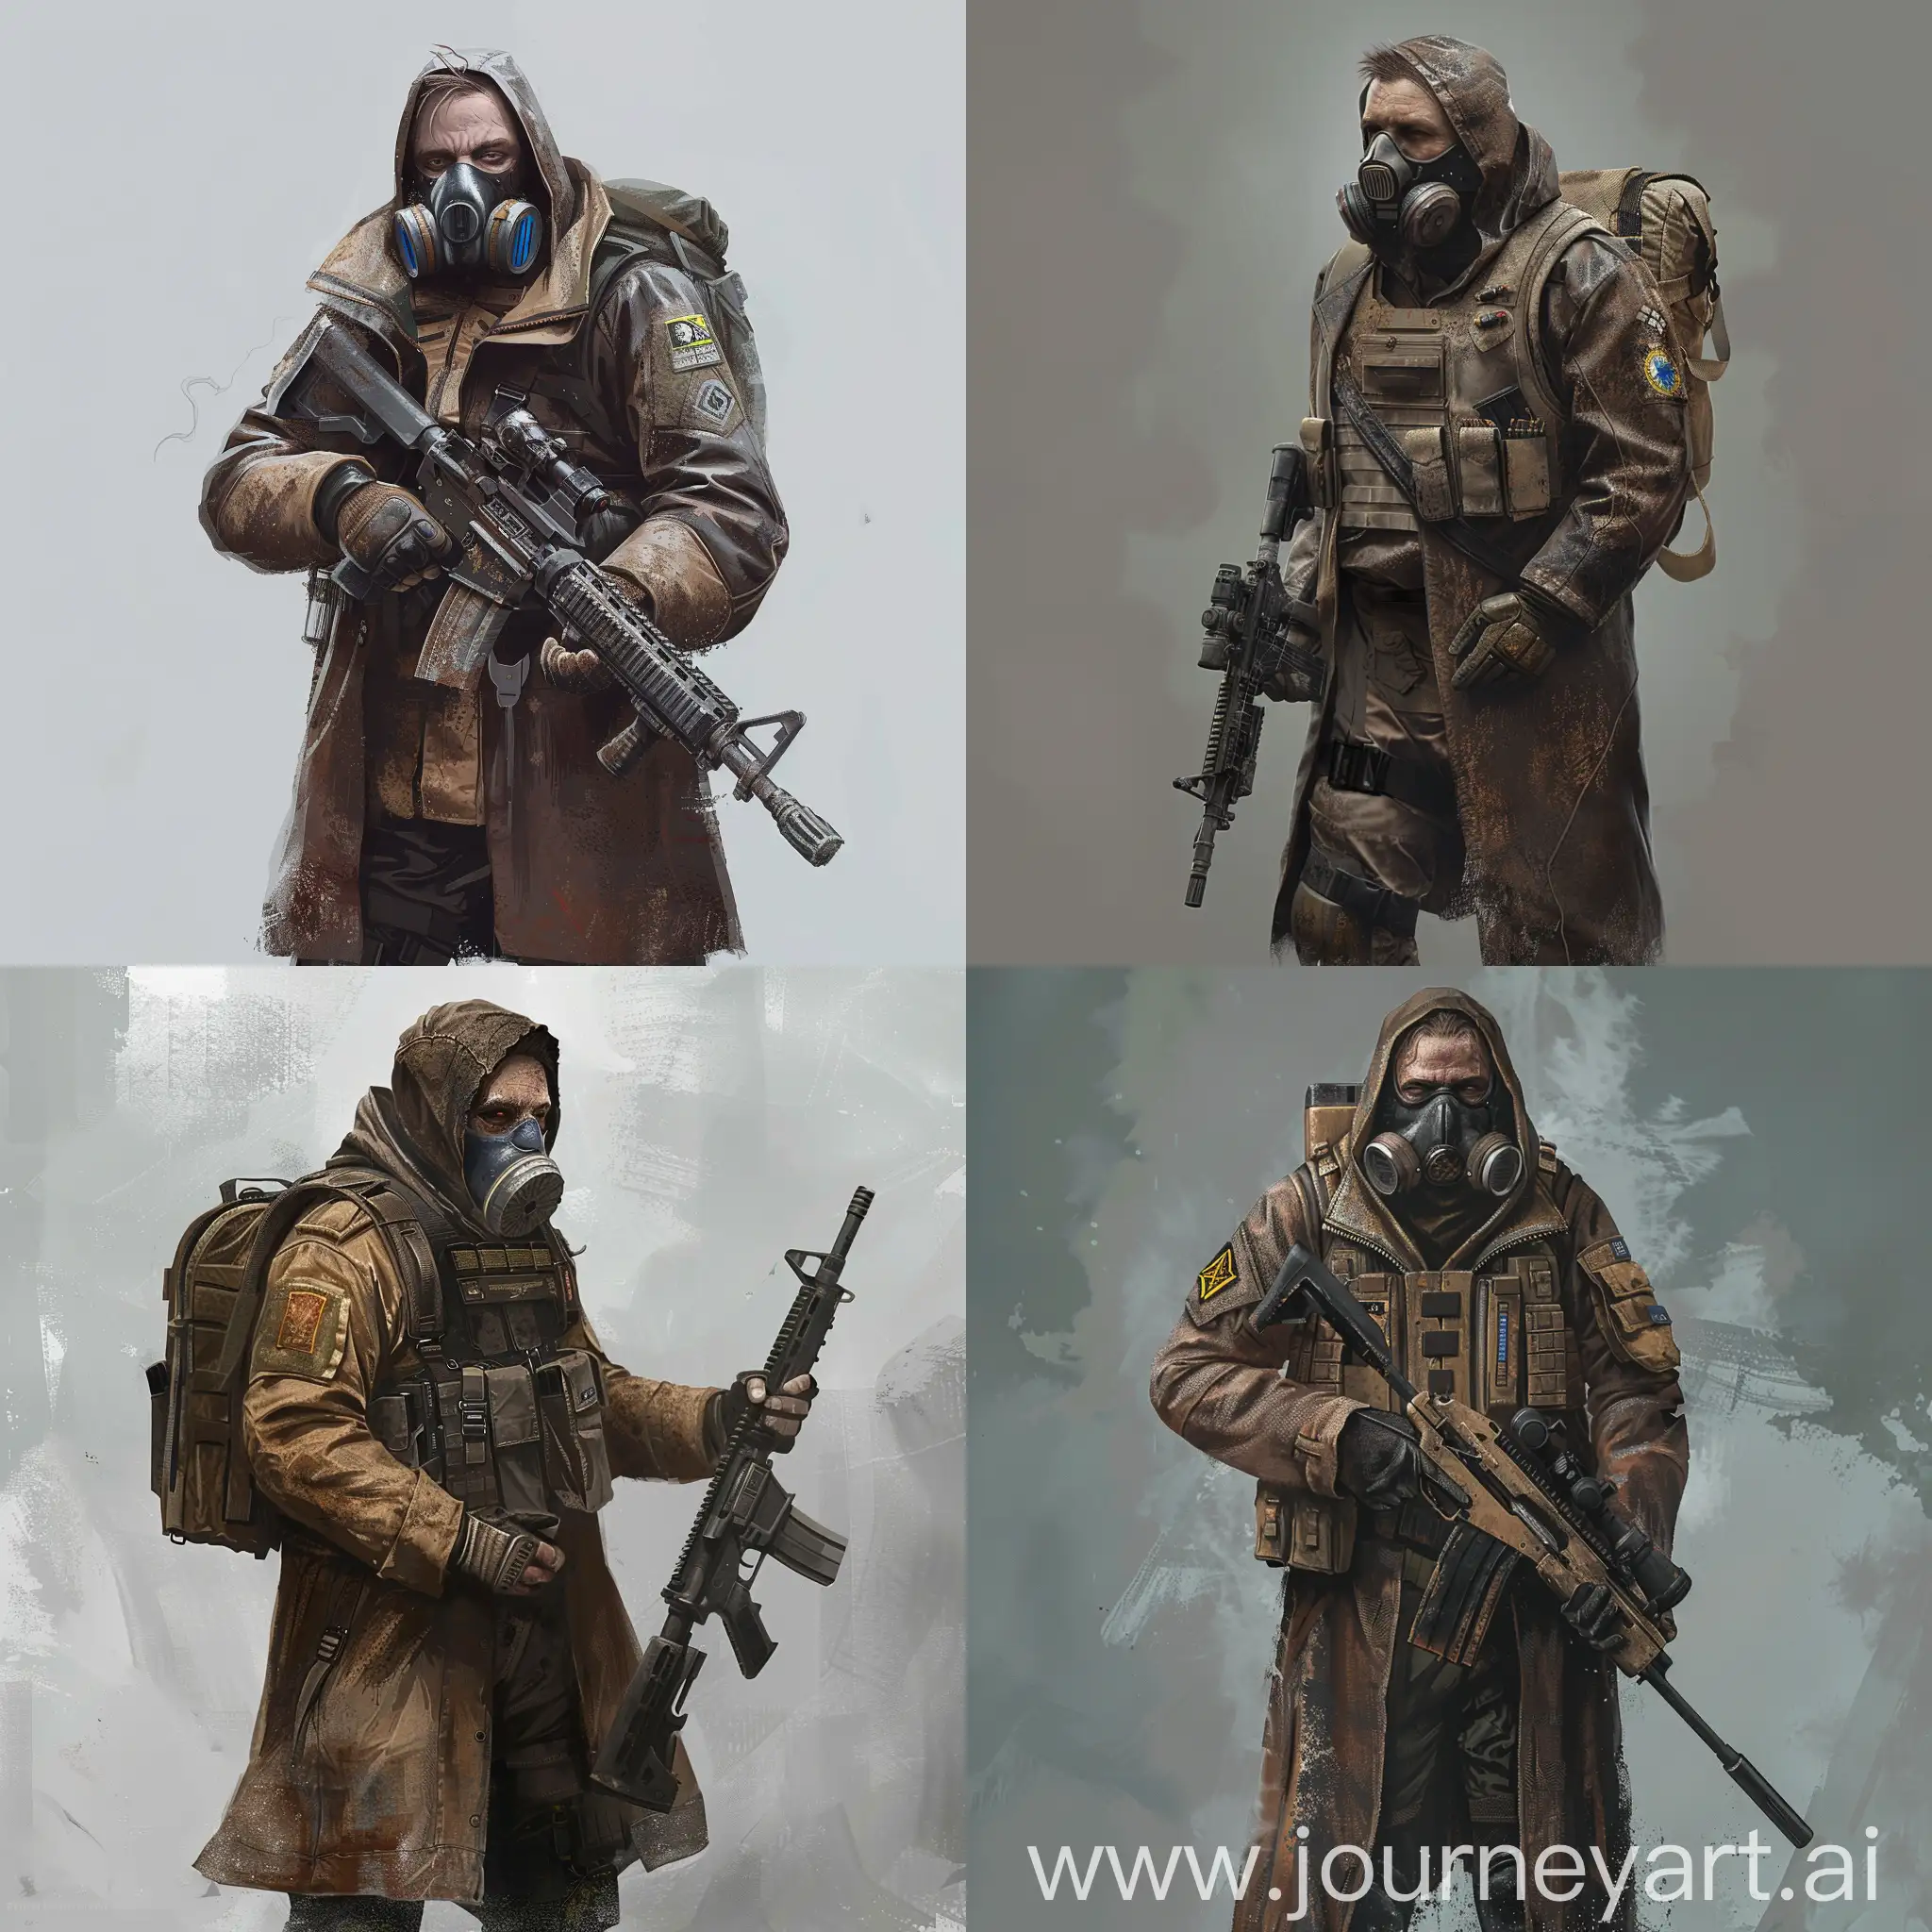 PostApocalyptic-Sniper-Character-in-Dark-Brown-Raincoat-with-Gas-Mask-and-Sniper-Rifle